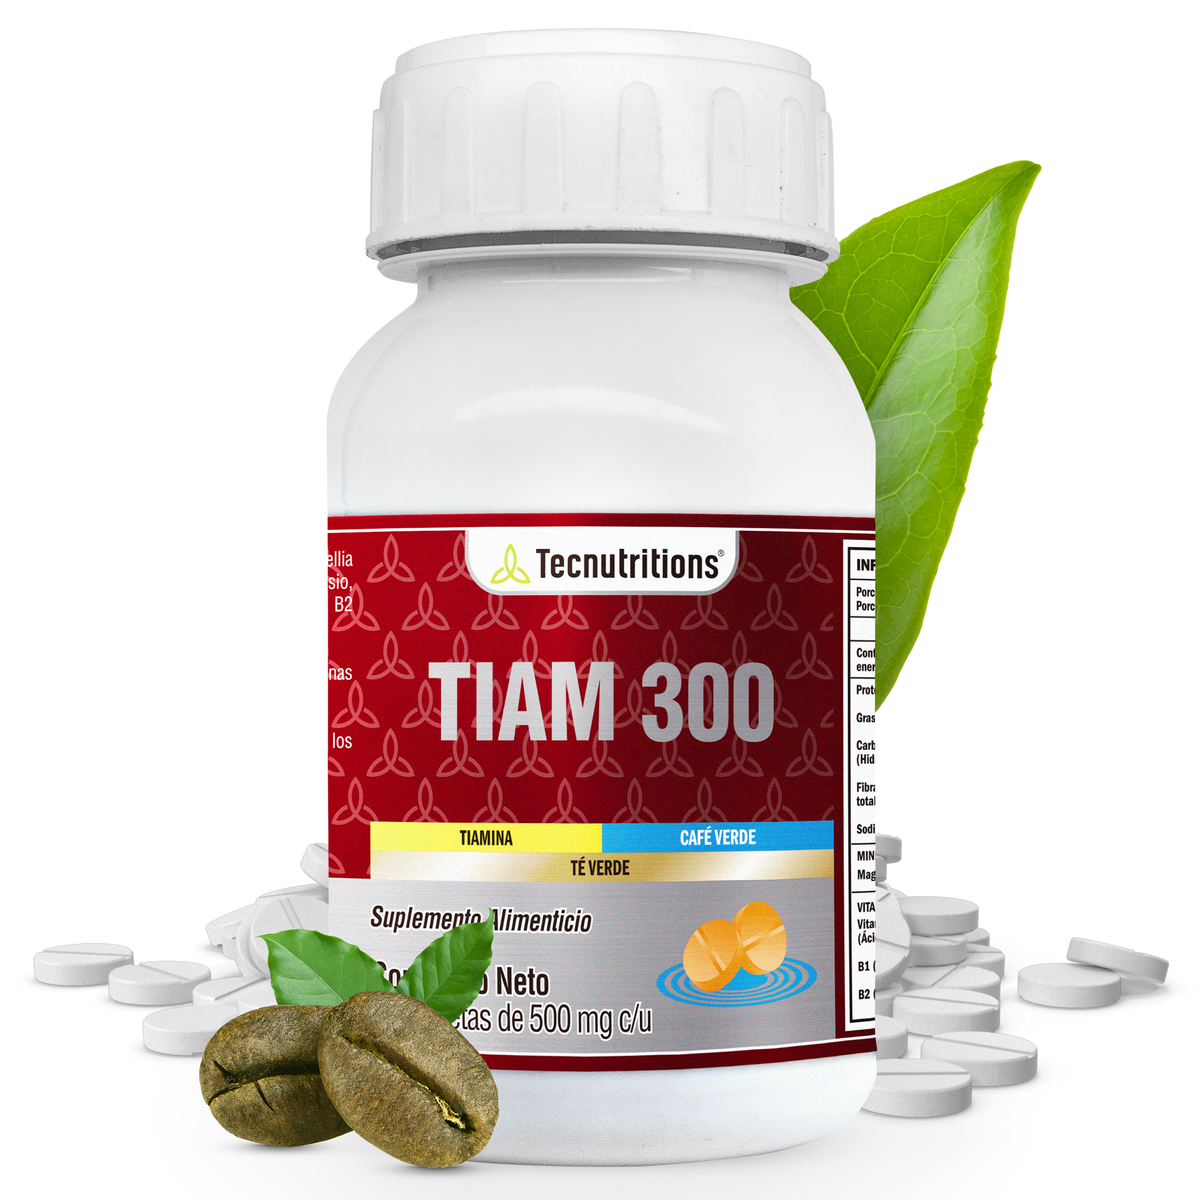 Food supplement with vitamins, minerals and antioxidants, Tiam 300, 60 tabl